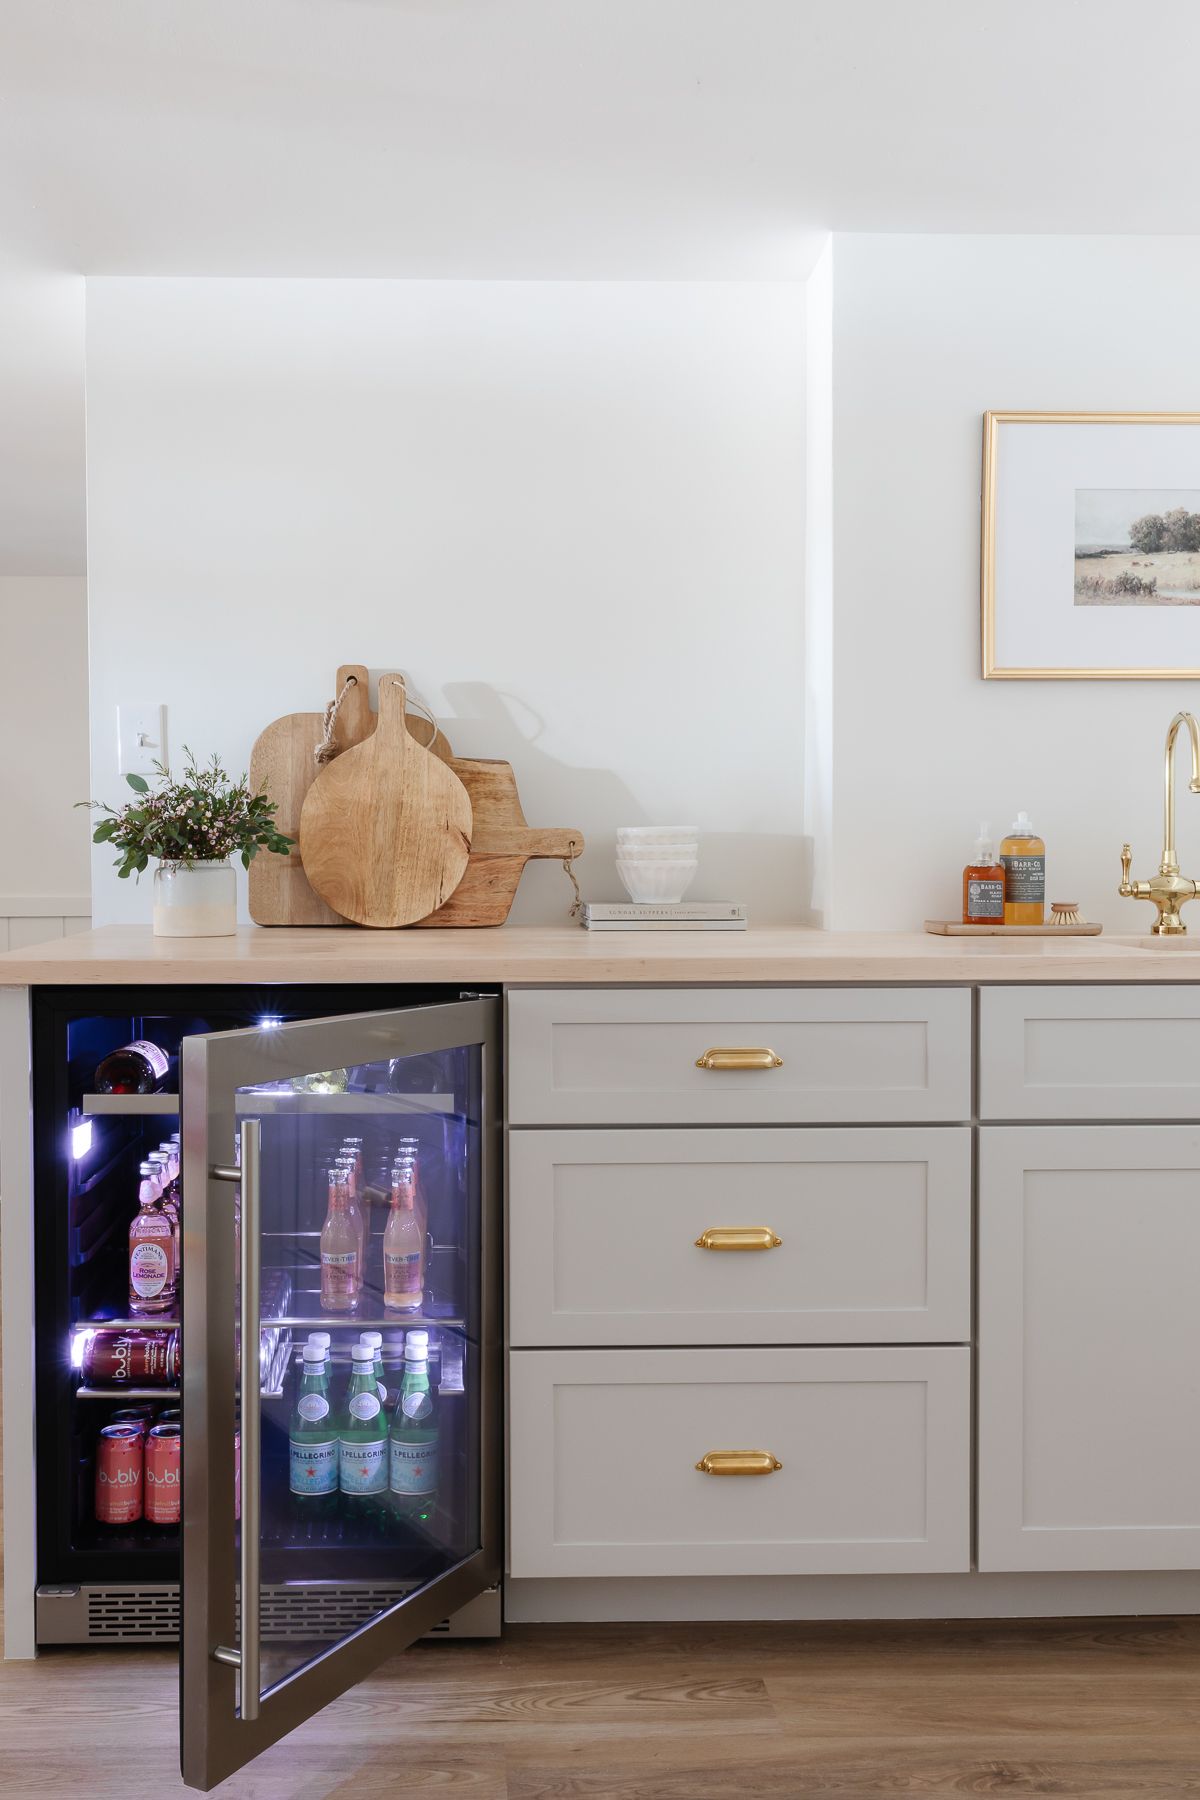 A basement wet bar with a beverage refrigerator and wooden cutting boards